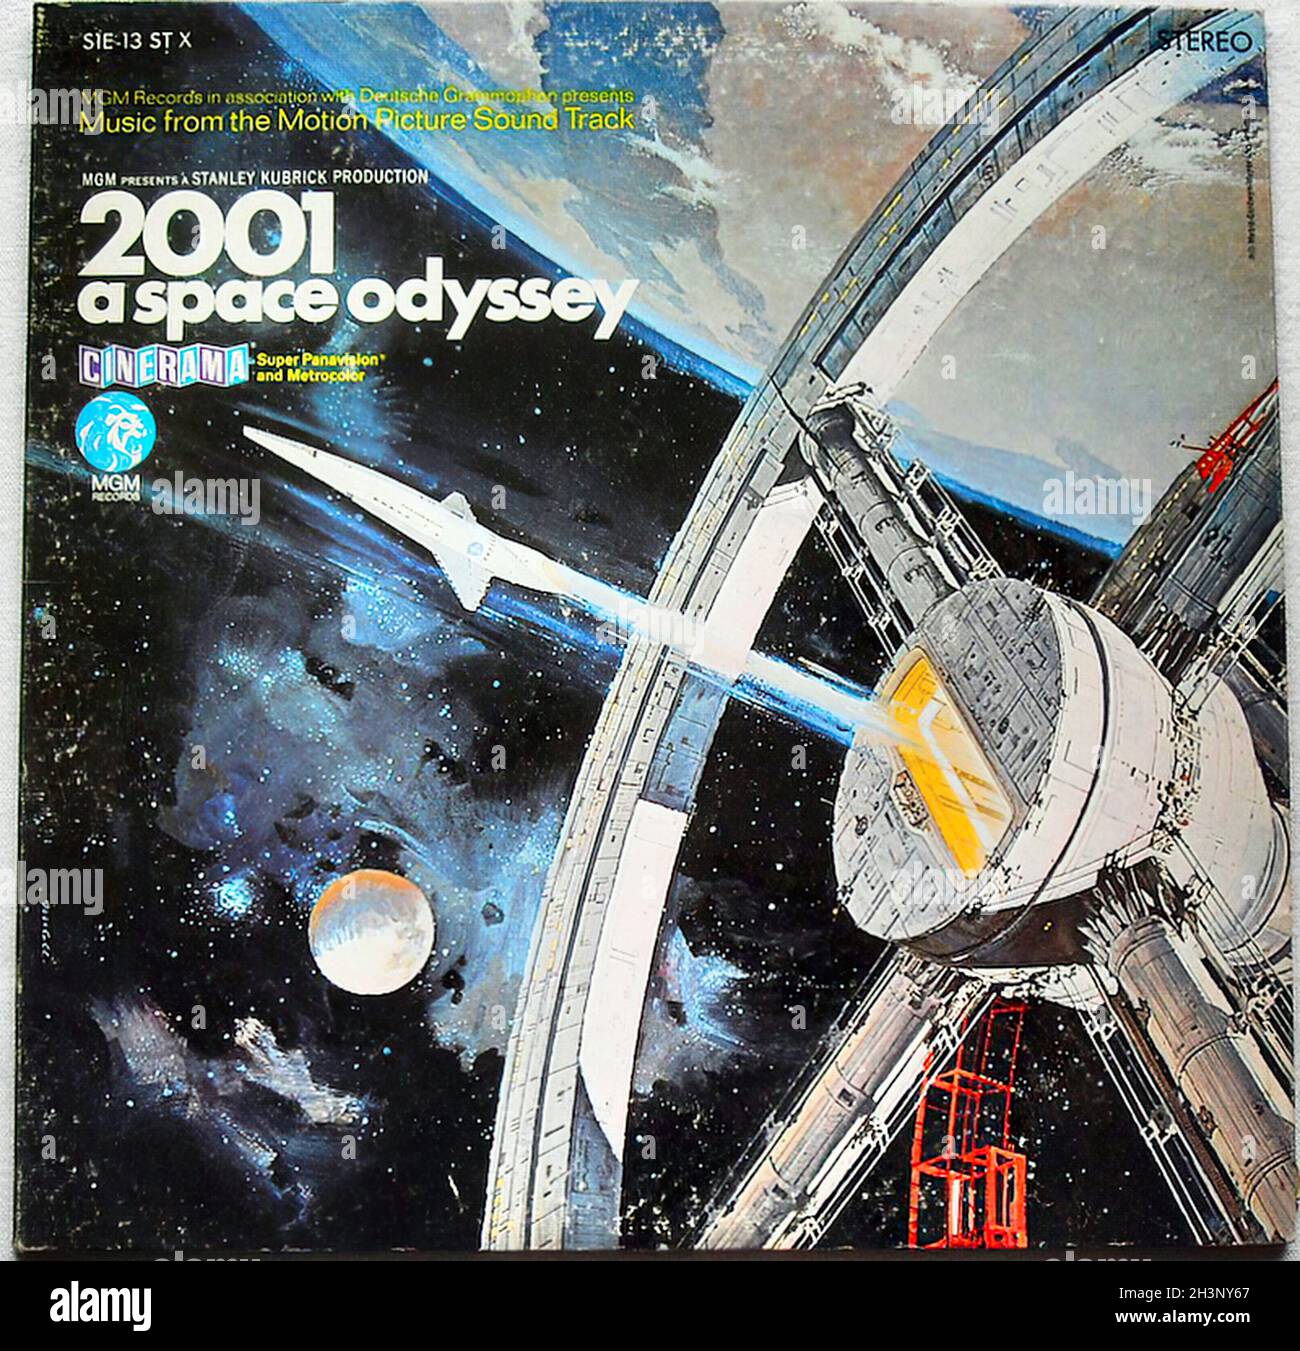 1968 Lp 2001 a Space Odyssey Lp Cover Illustration Graphics Album Record Stock Photo